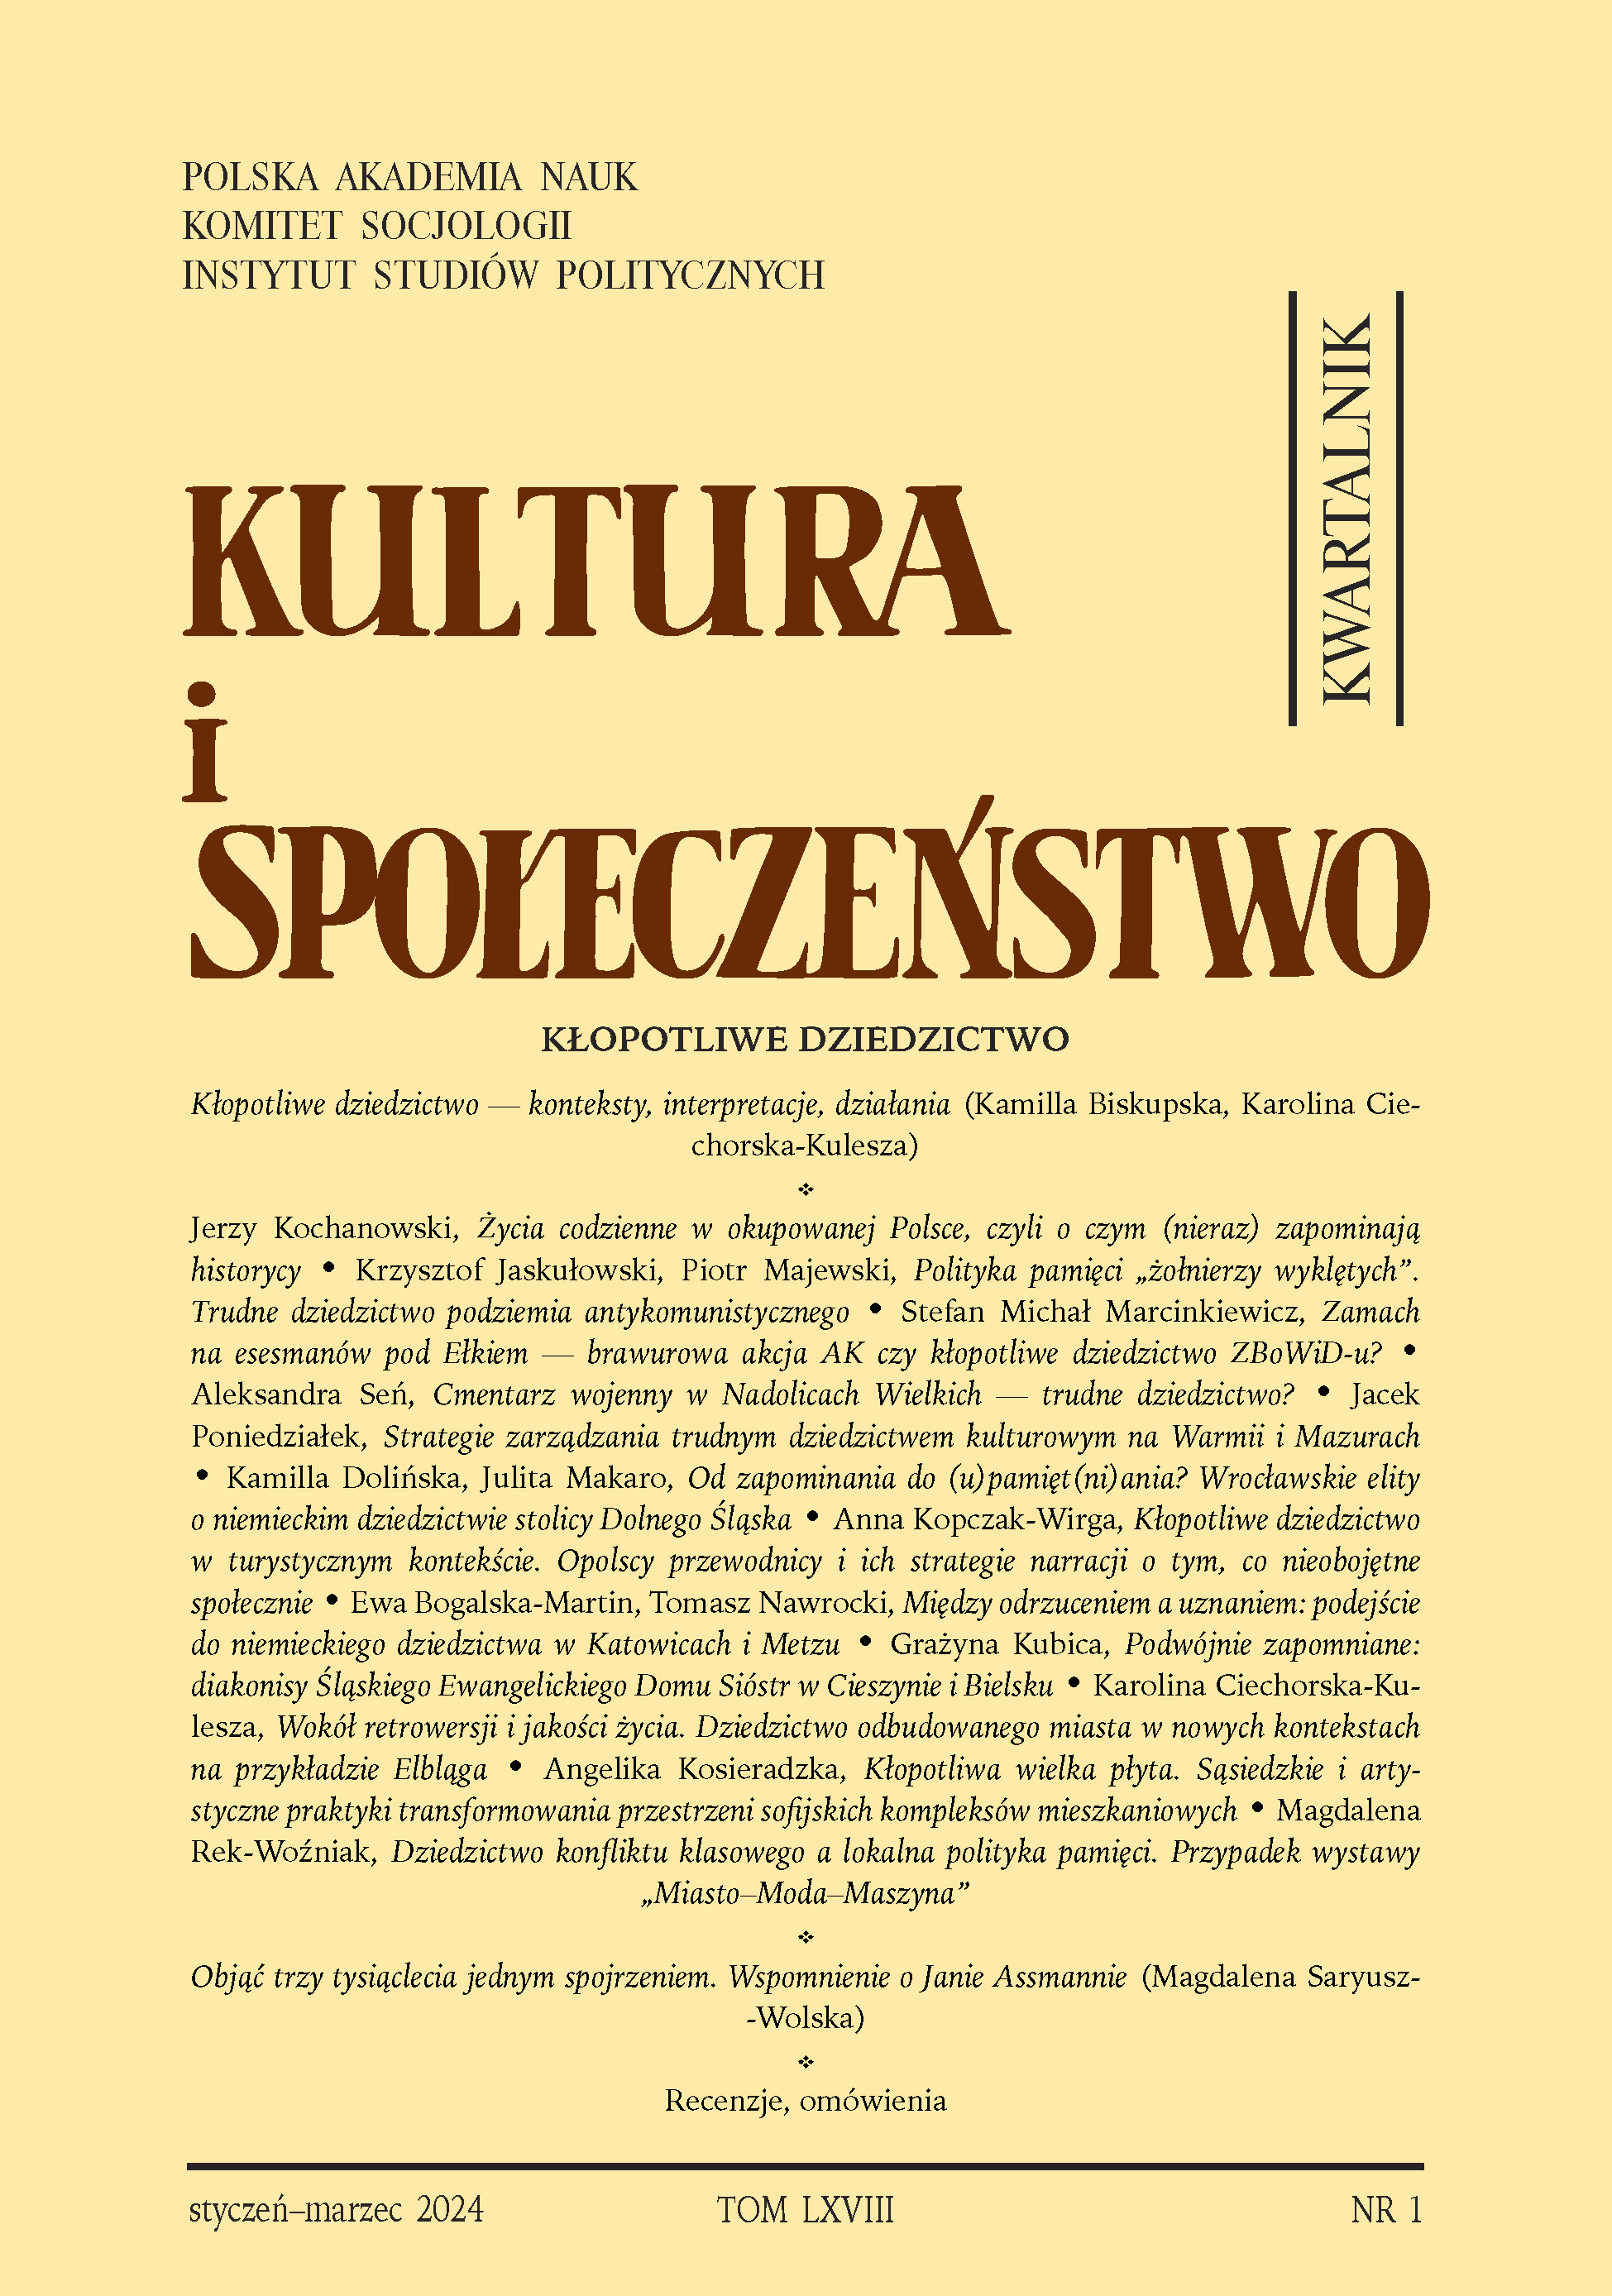 ON RETROVERSION AND QUALITY OF LIFE. HERITAGE OF THE REBUILT CITY IN NEW CONTEXTS, ON THE EXAMPLE OF ELBLĄG Cover Image